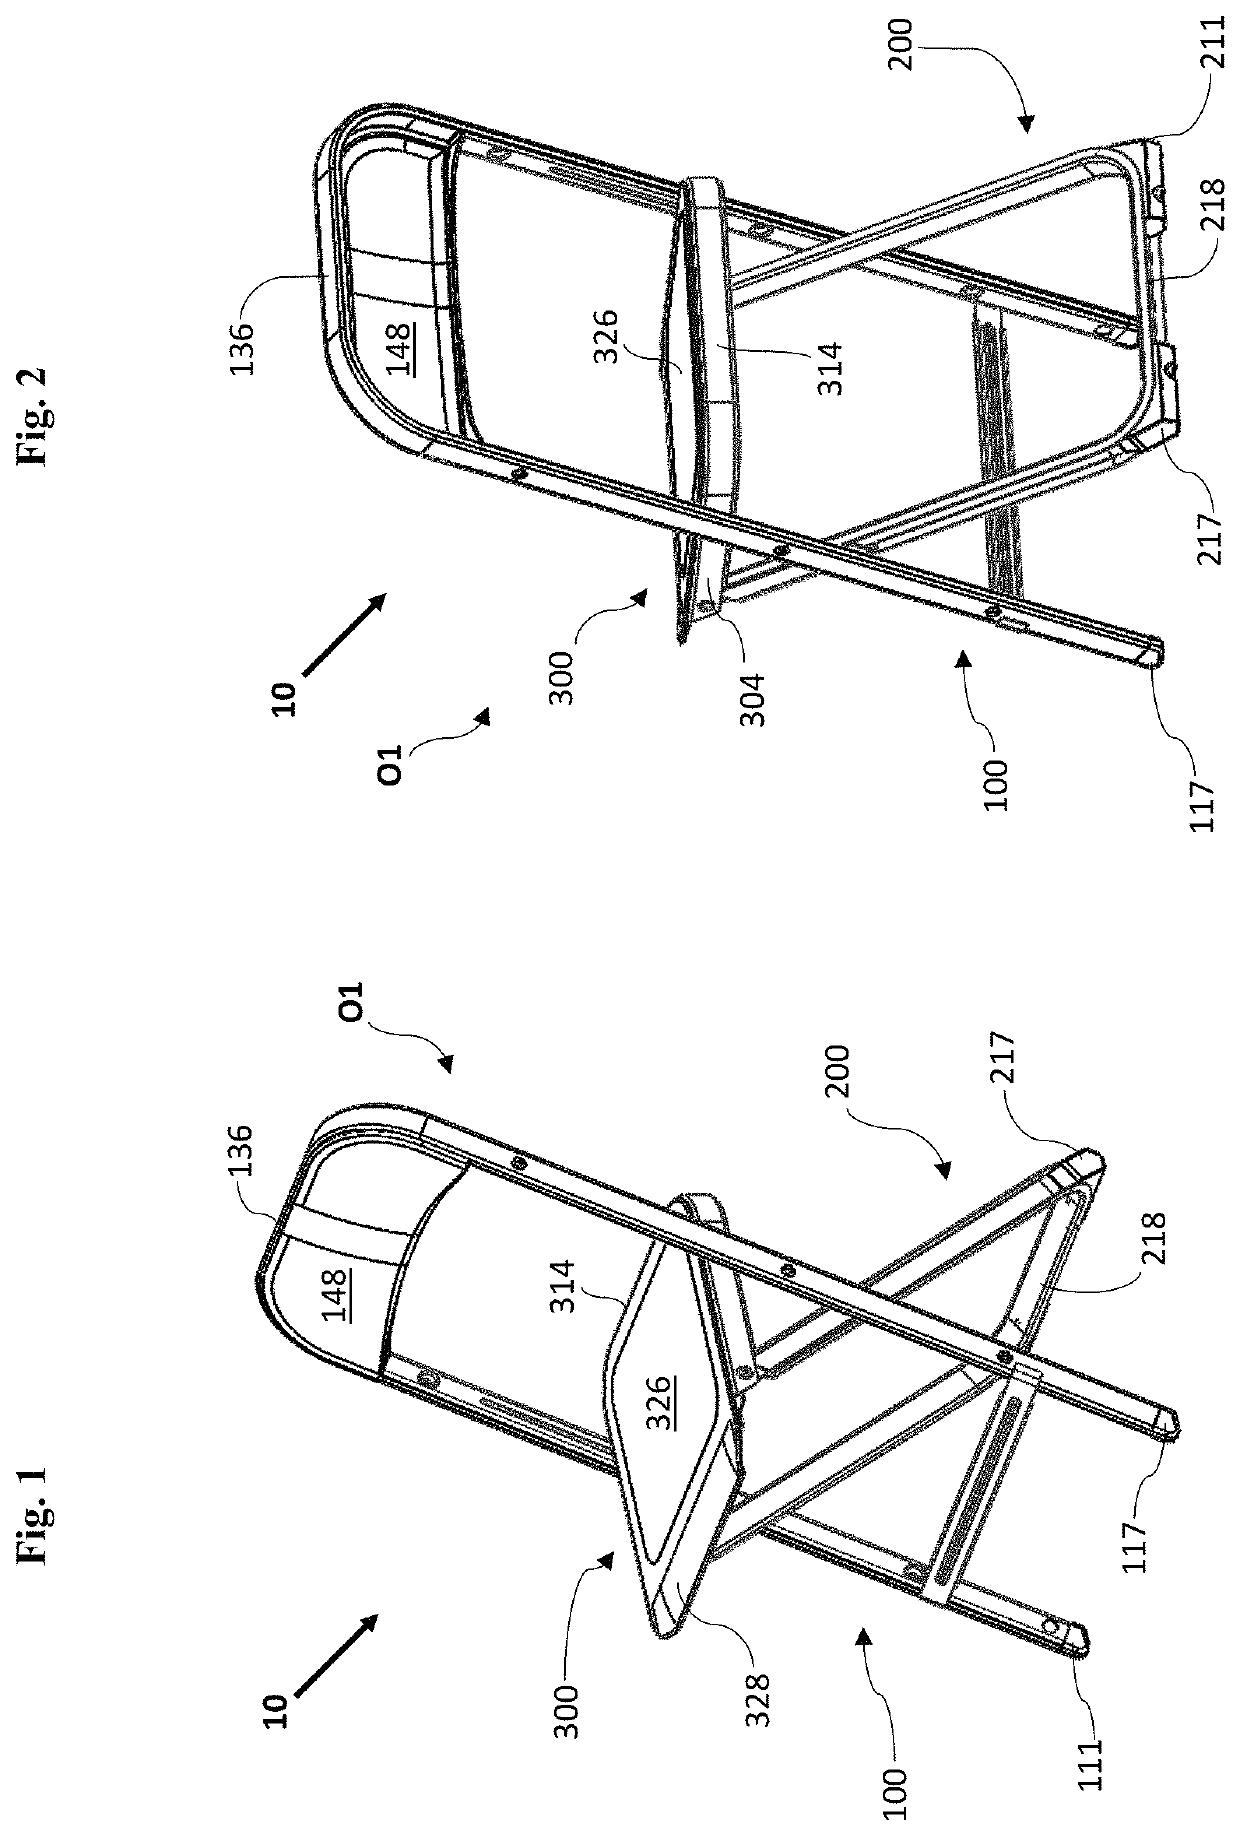 Folding chair and method of assembly